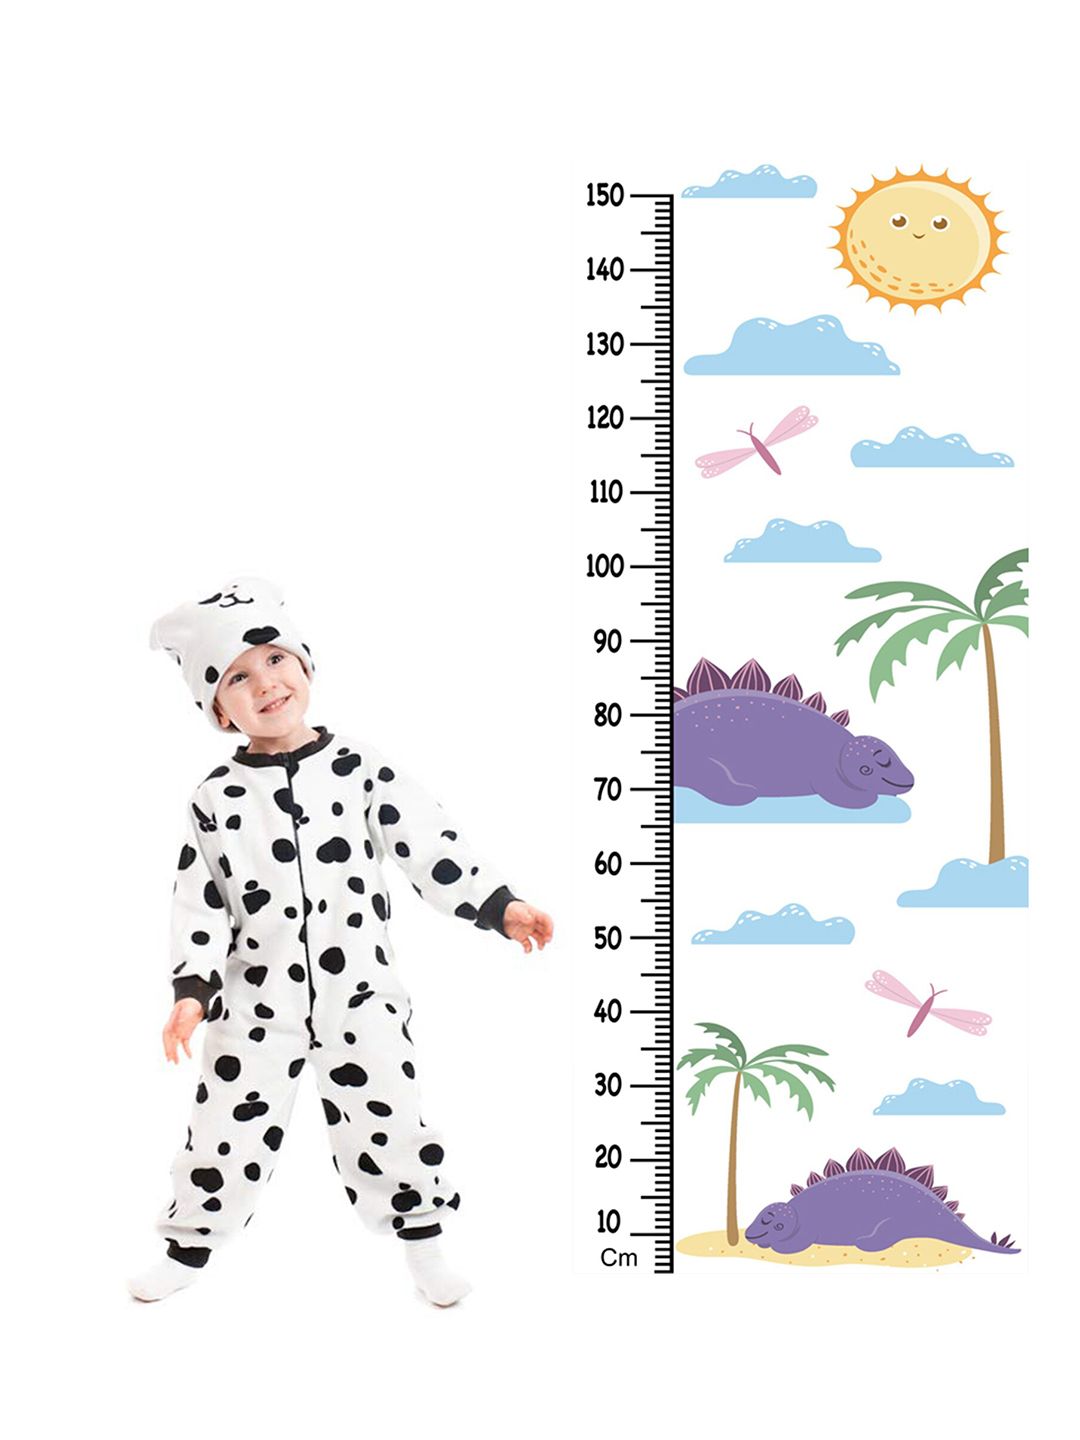 WENS Dino Height Measurement Removable Wall Sticker Price in India